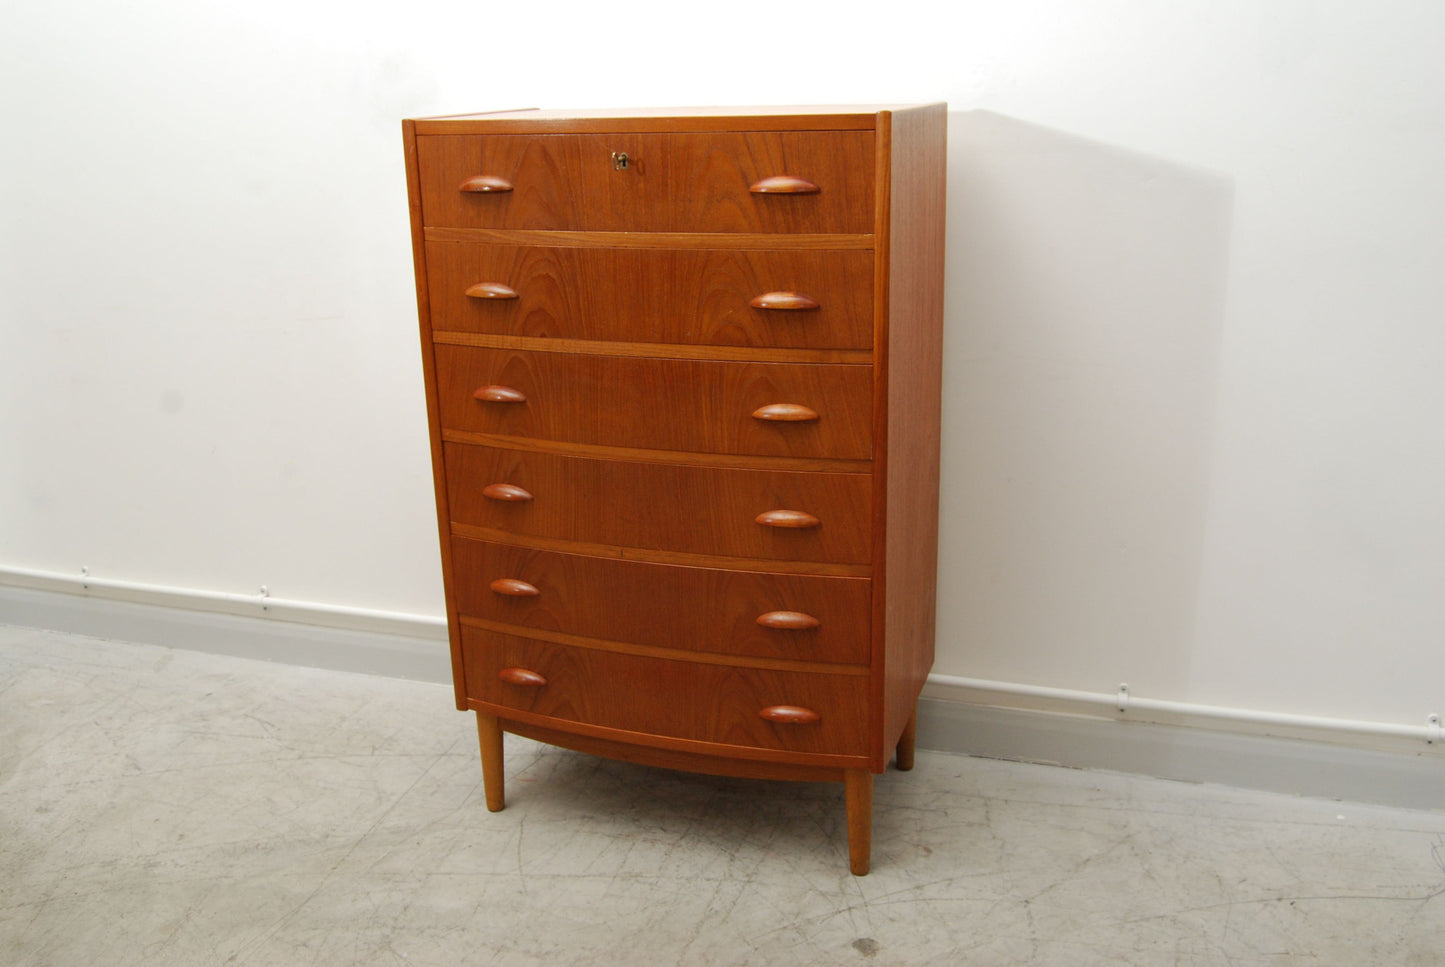 Bow-fronted chest of drawers in teak